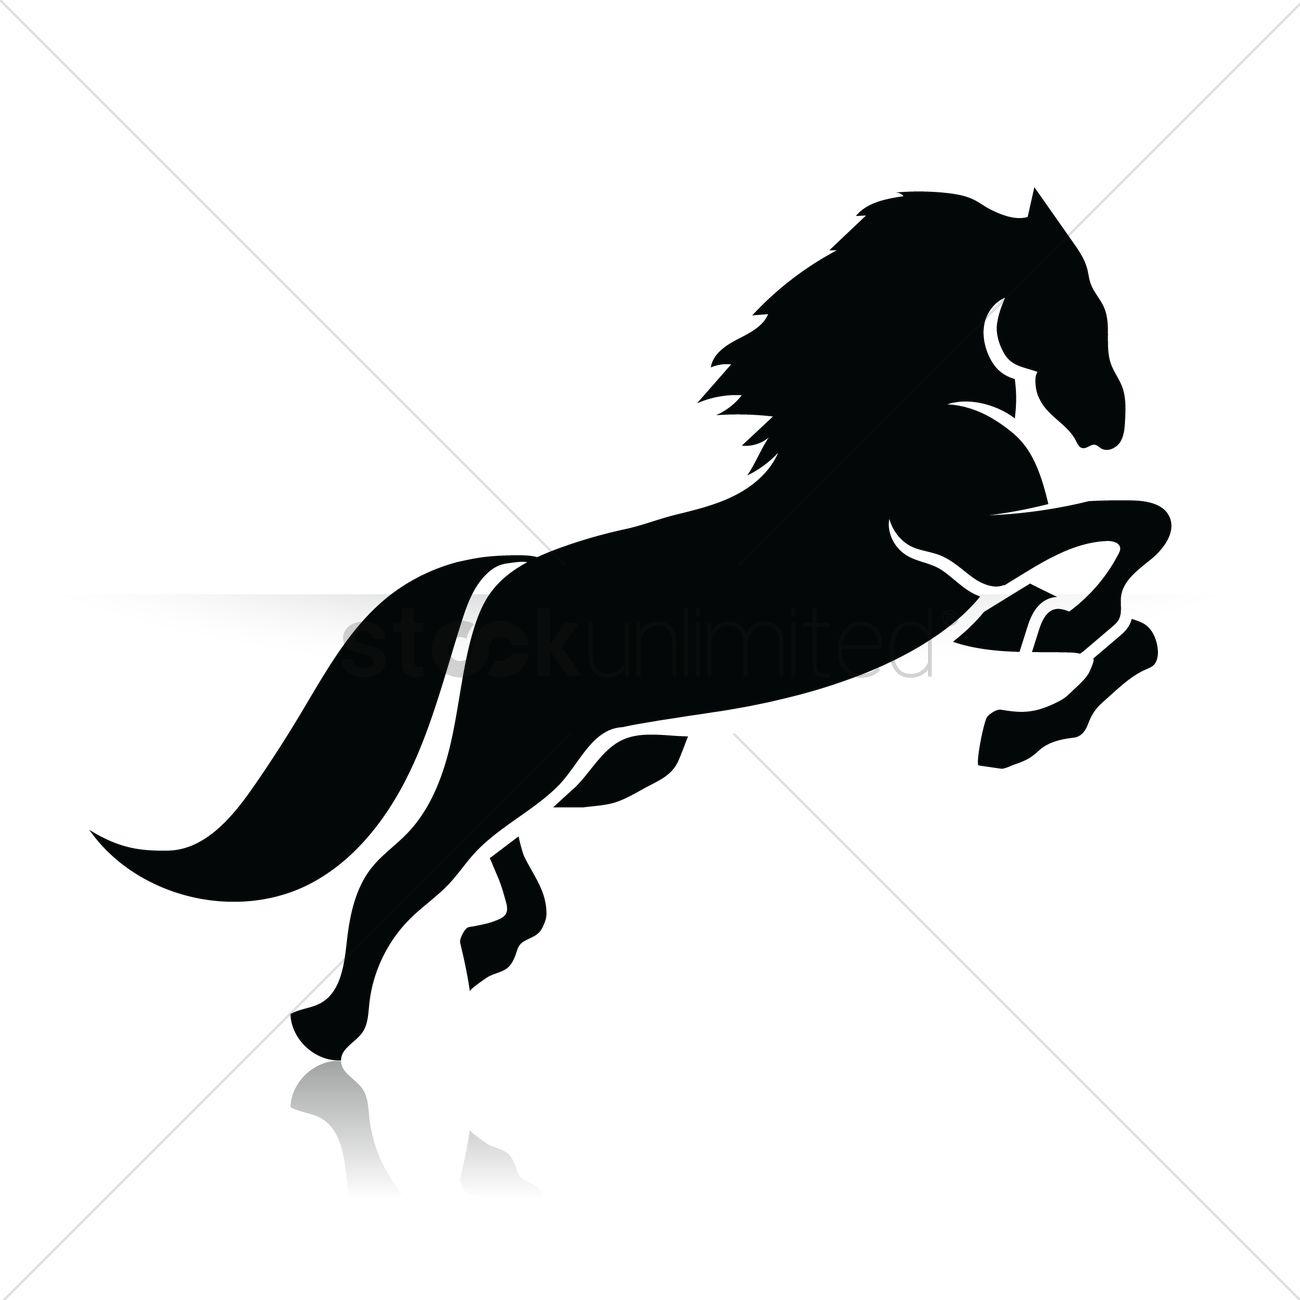 Horse Jumping Vector Logo - Silhouette of horse jumping Vector Image